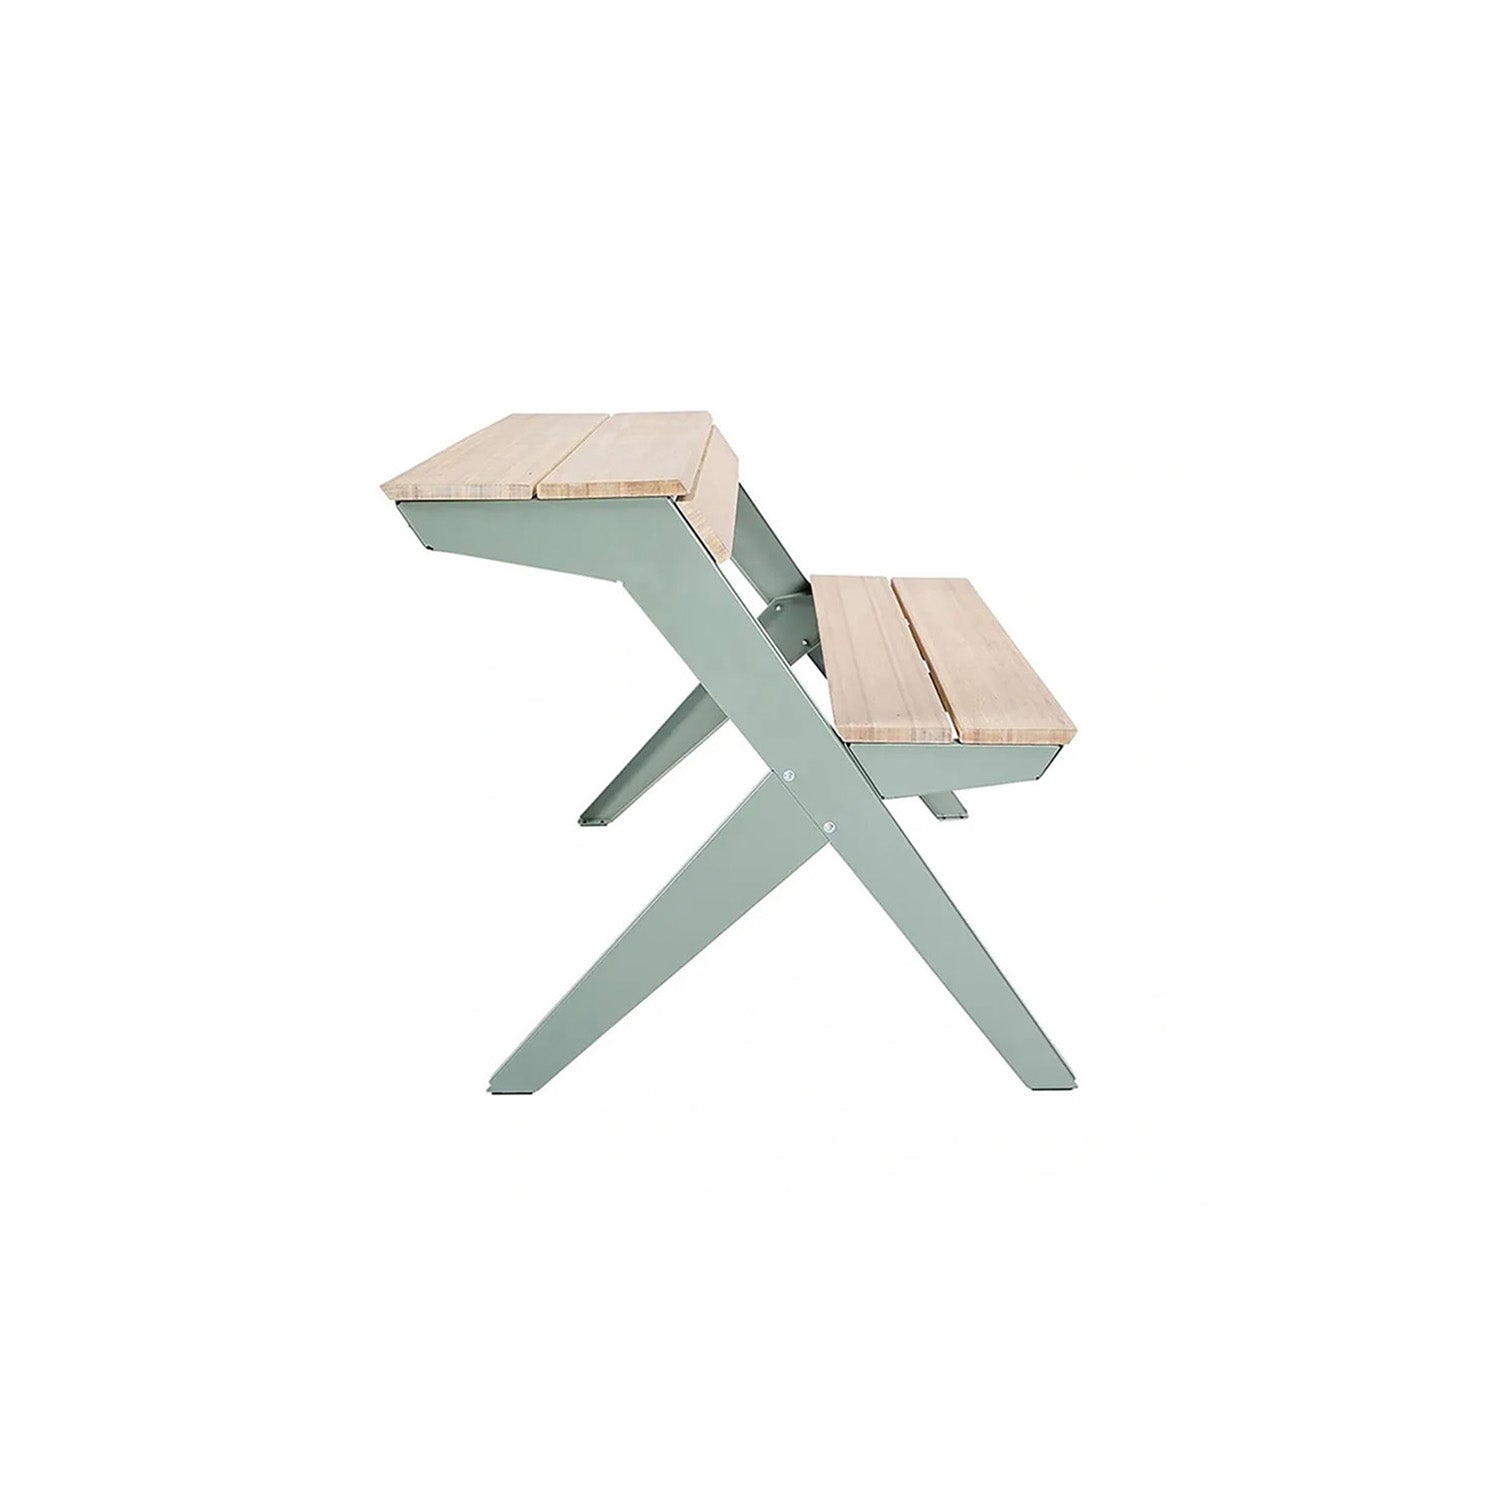 Tablebench: 3 Seater + Cement Grey